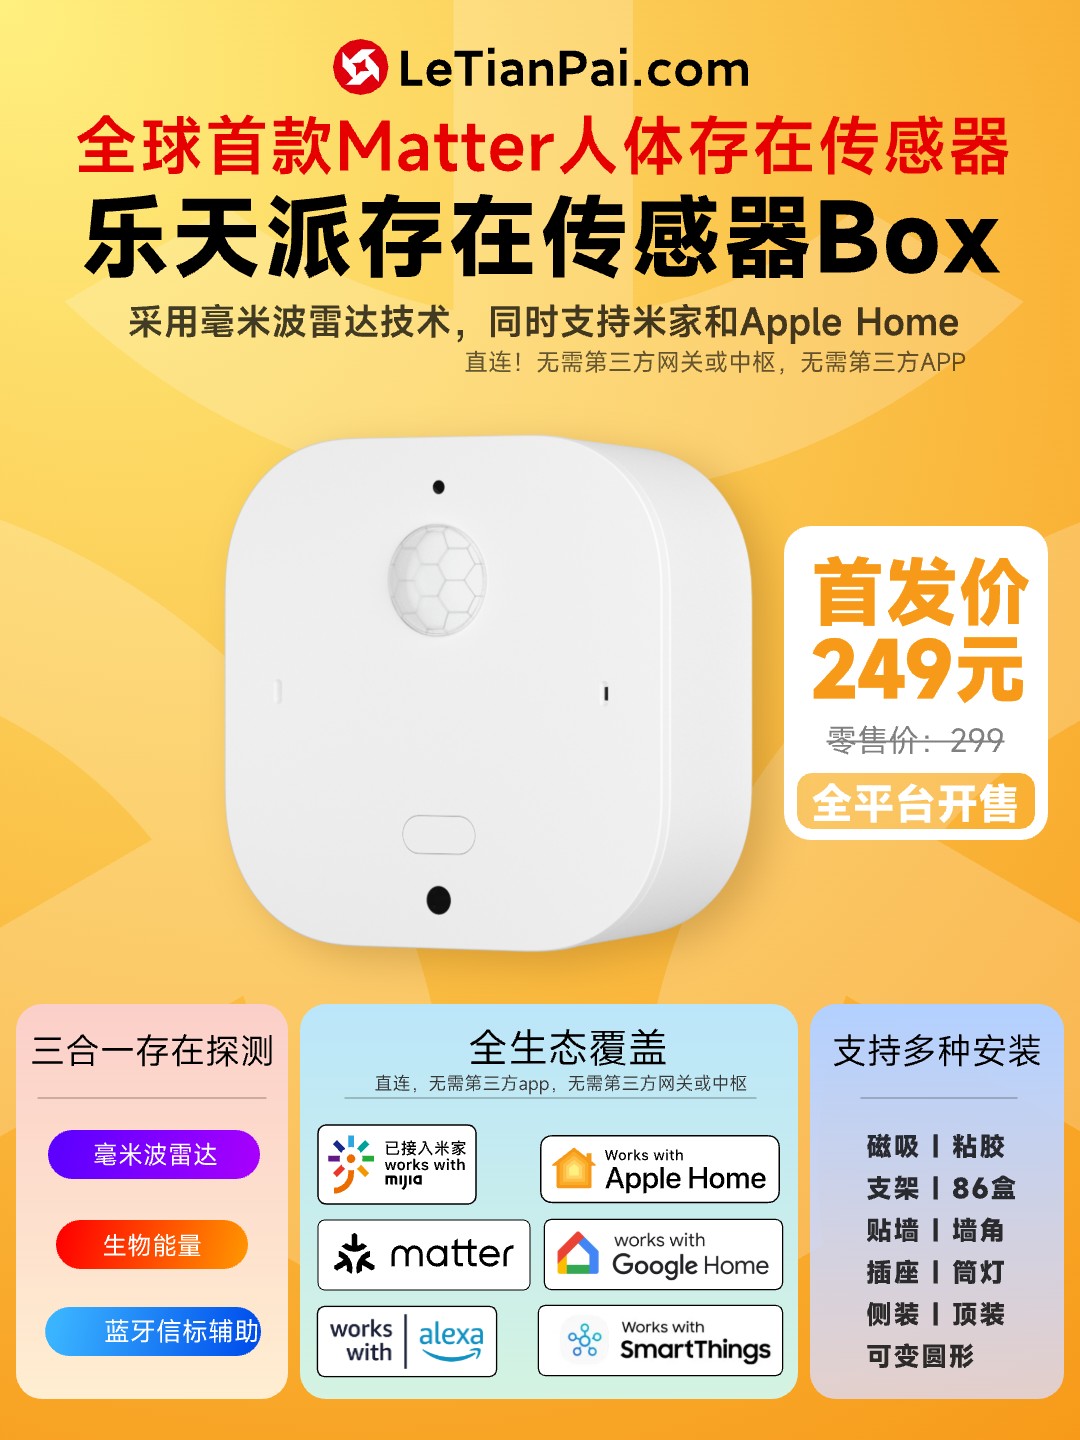  As a domestic MATER smart home enterprise, Lotte has launched the world's first MATER human presence sensor, "Lotte Human Presence Sensor Box", which uses millimeter wave technology to fill in the MATER human presence